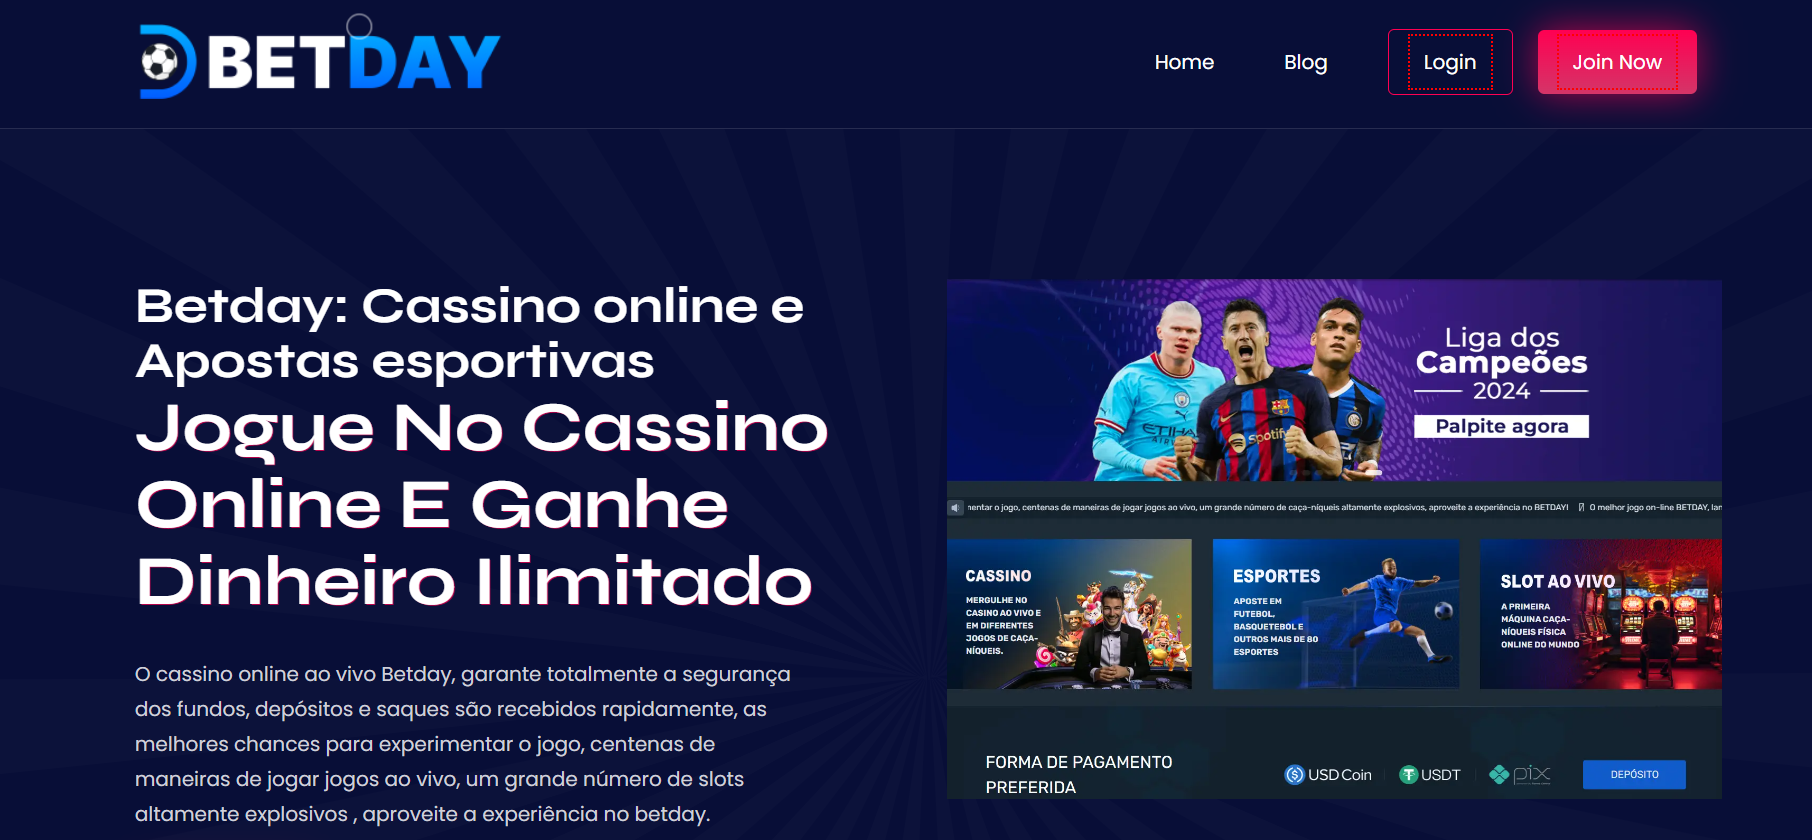 Betday Casino Online: The Ultimate User Experience